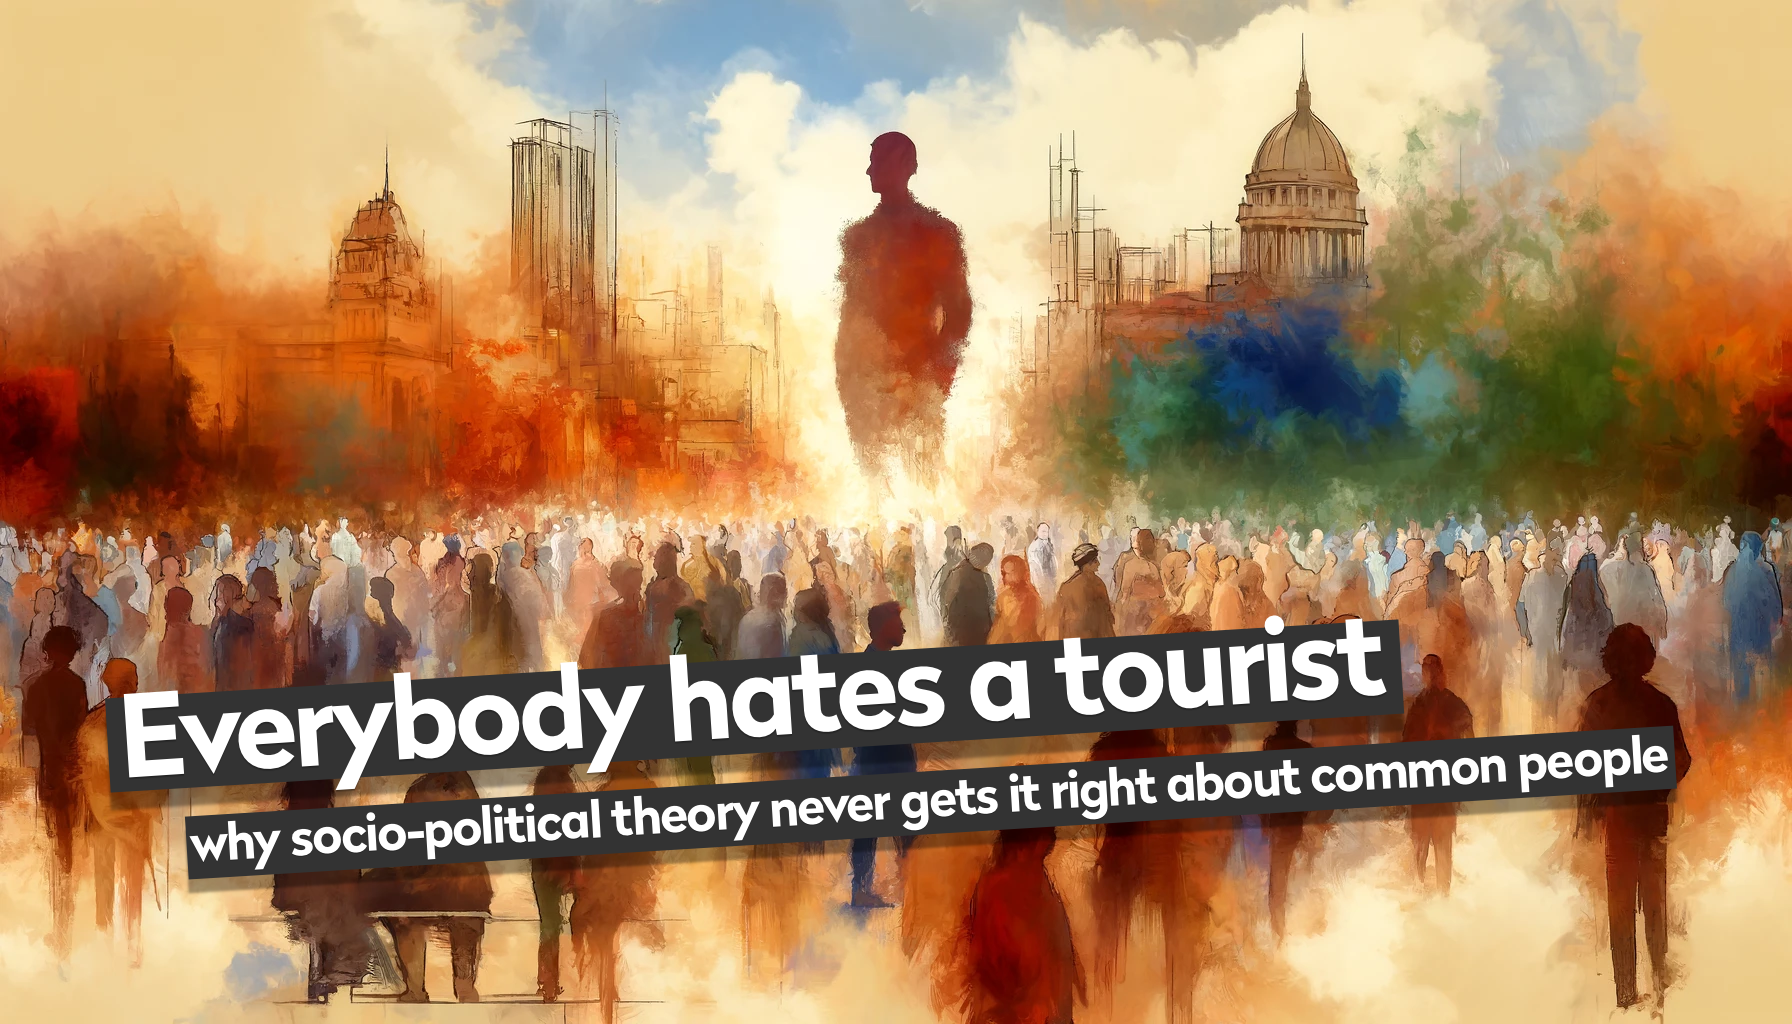 Everybody hates a tourist: why socio-political theory never gets it right about common people